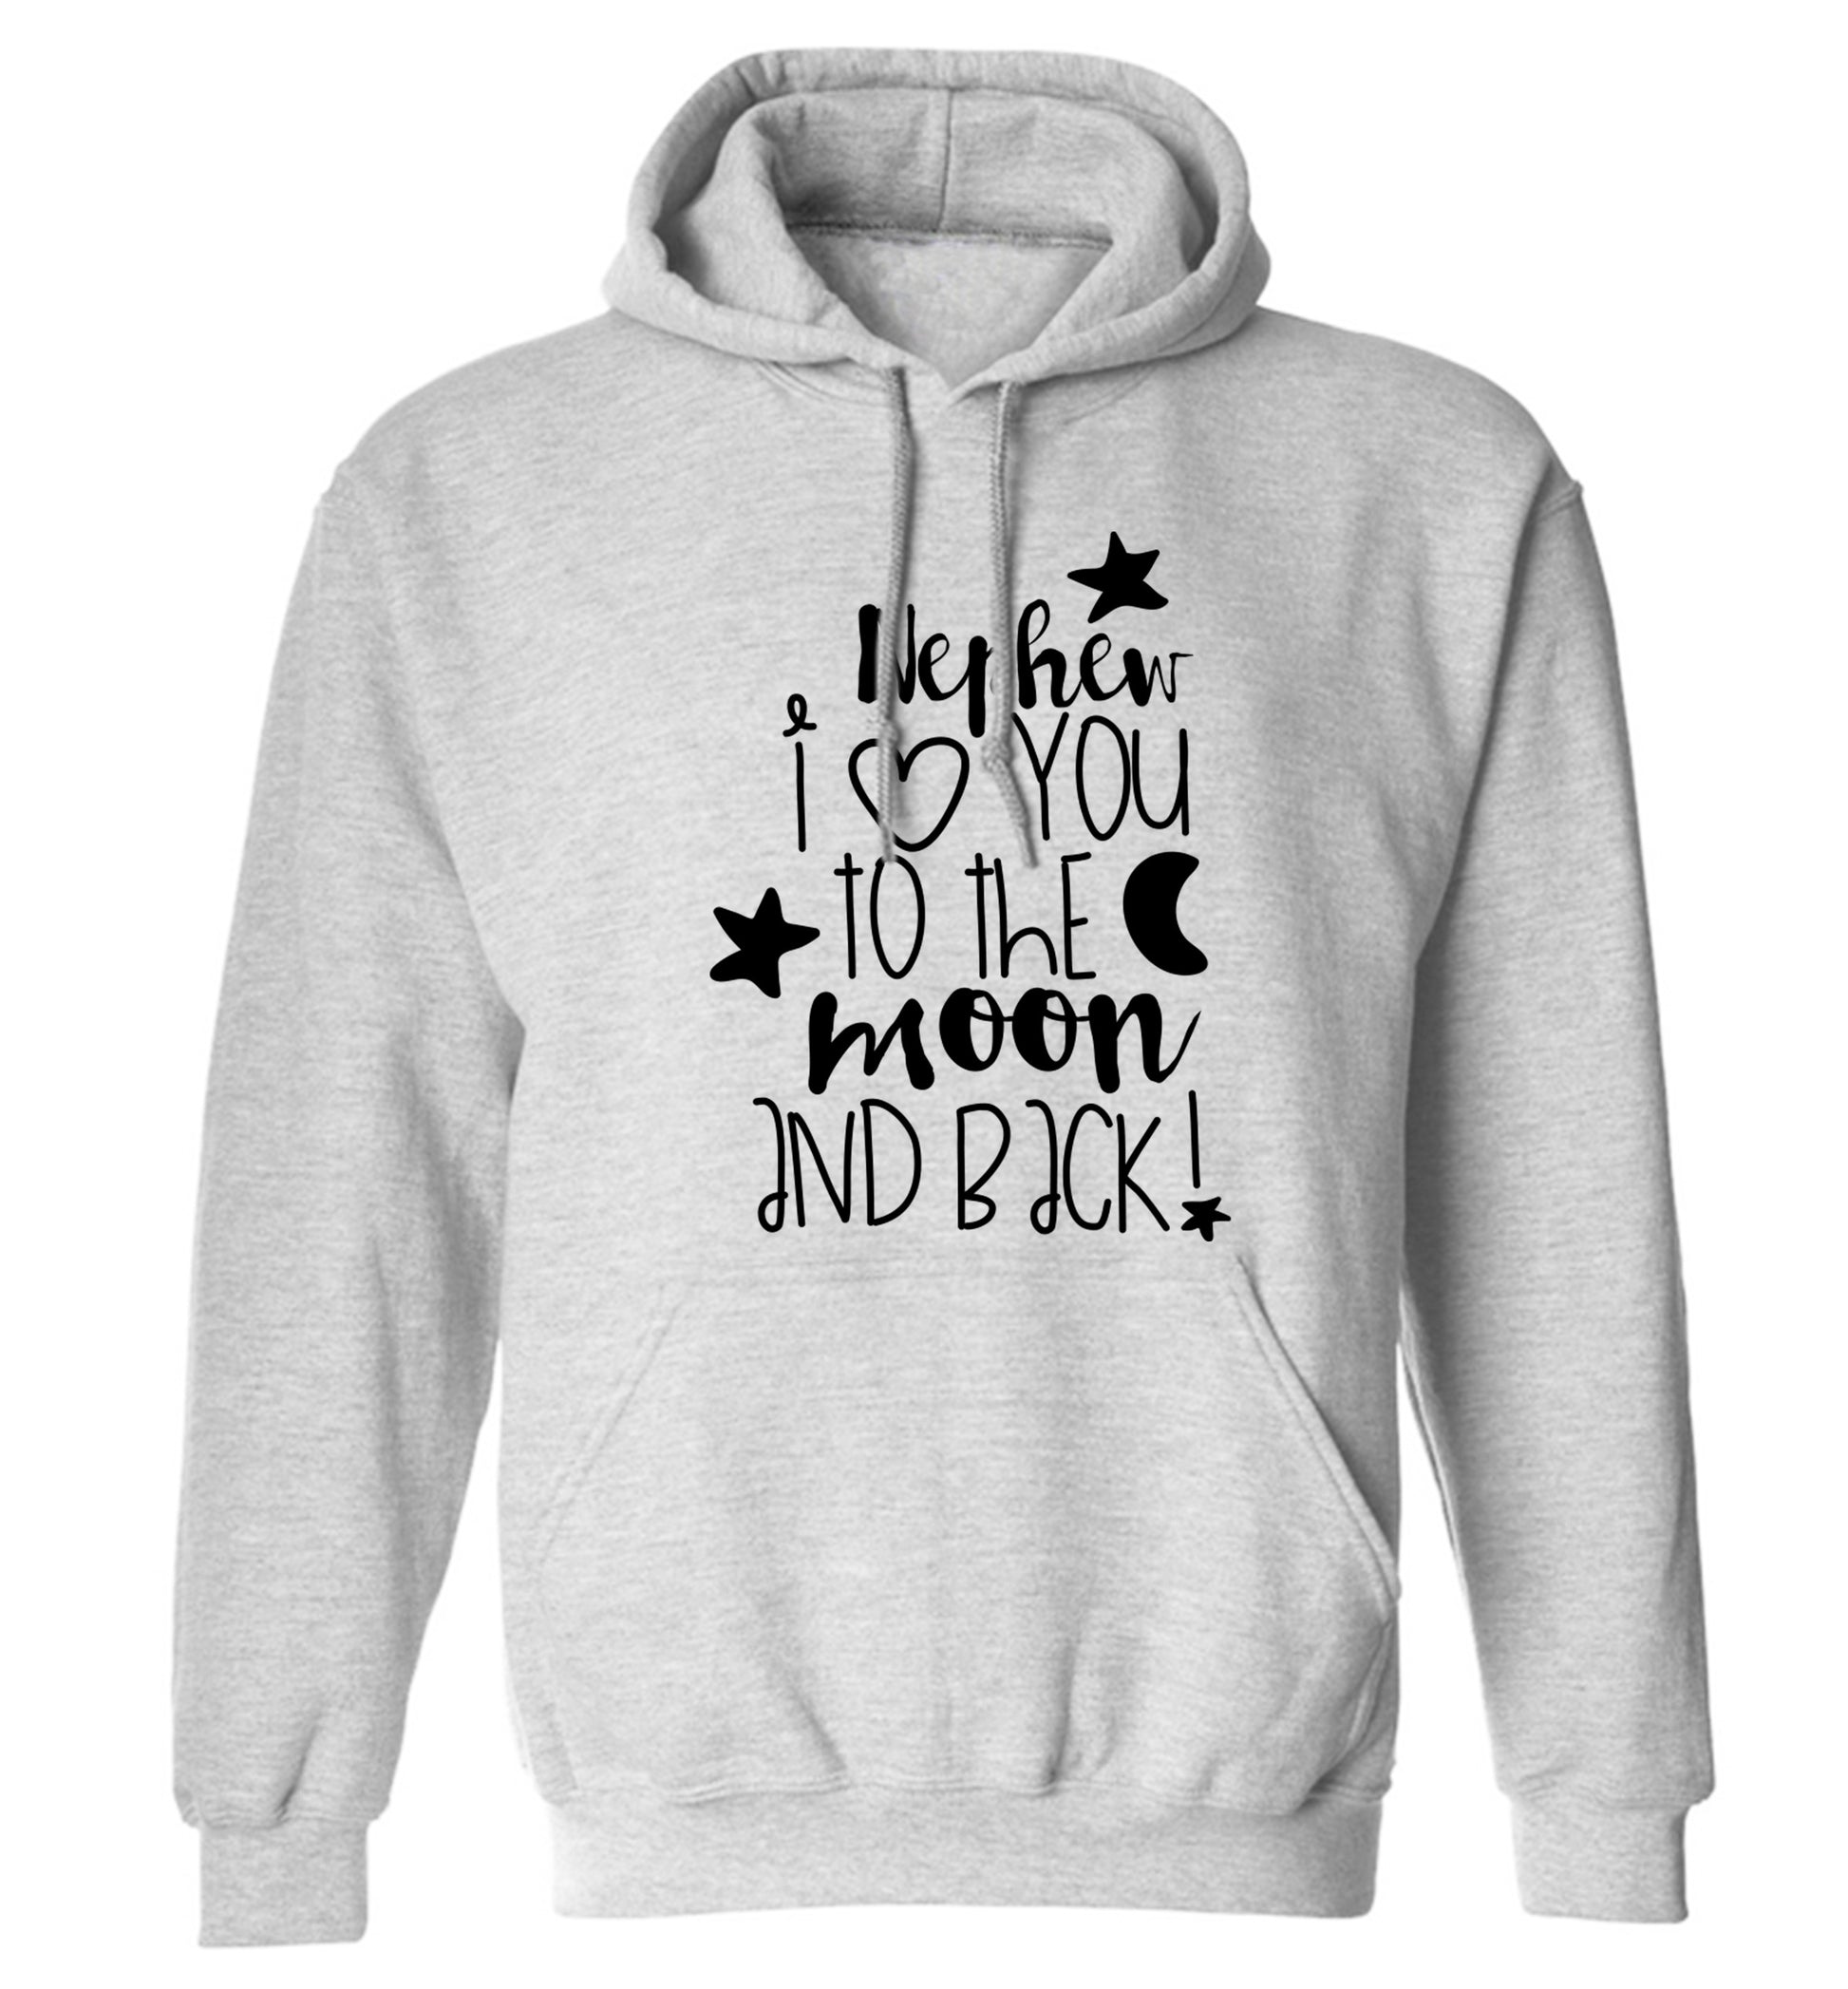 Nephew I love you to the moon and back adults unisex grey hoodie 2XL